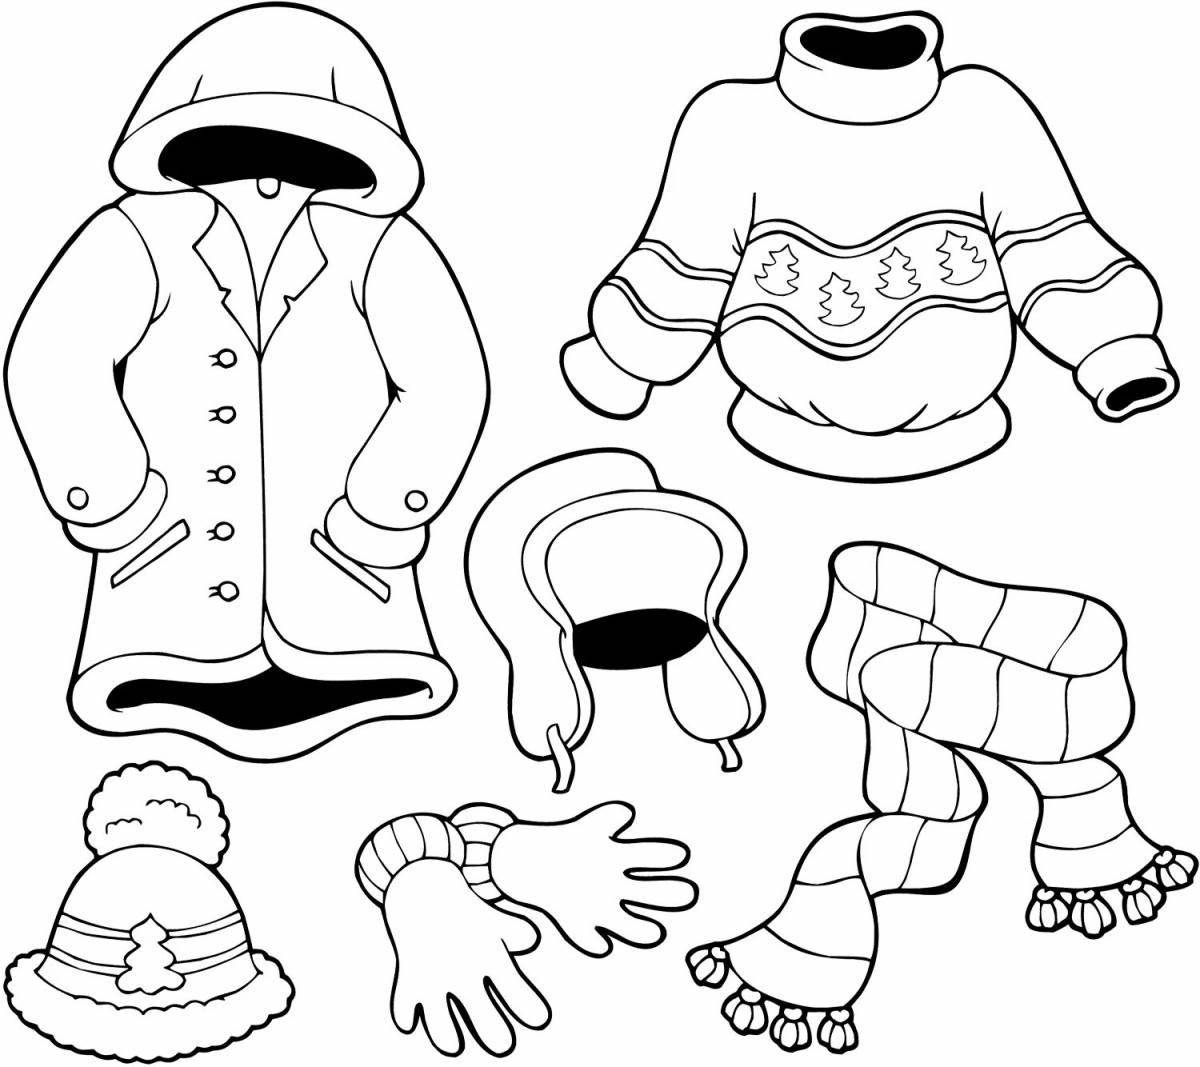 Coloring page dramatic winter clothes